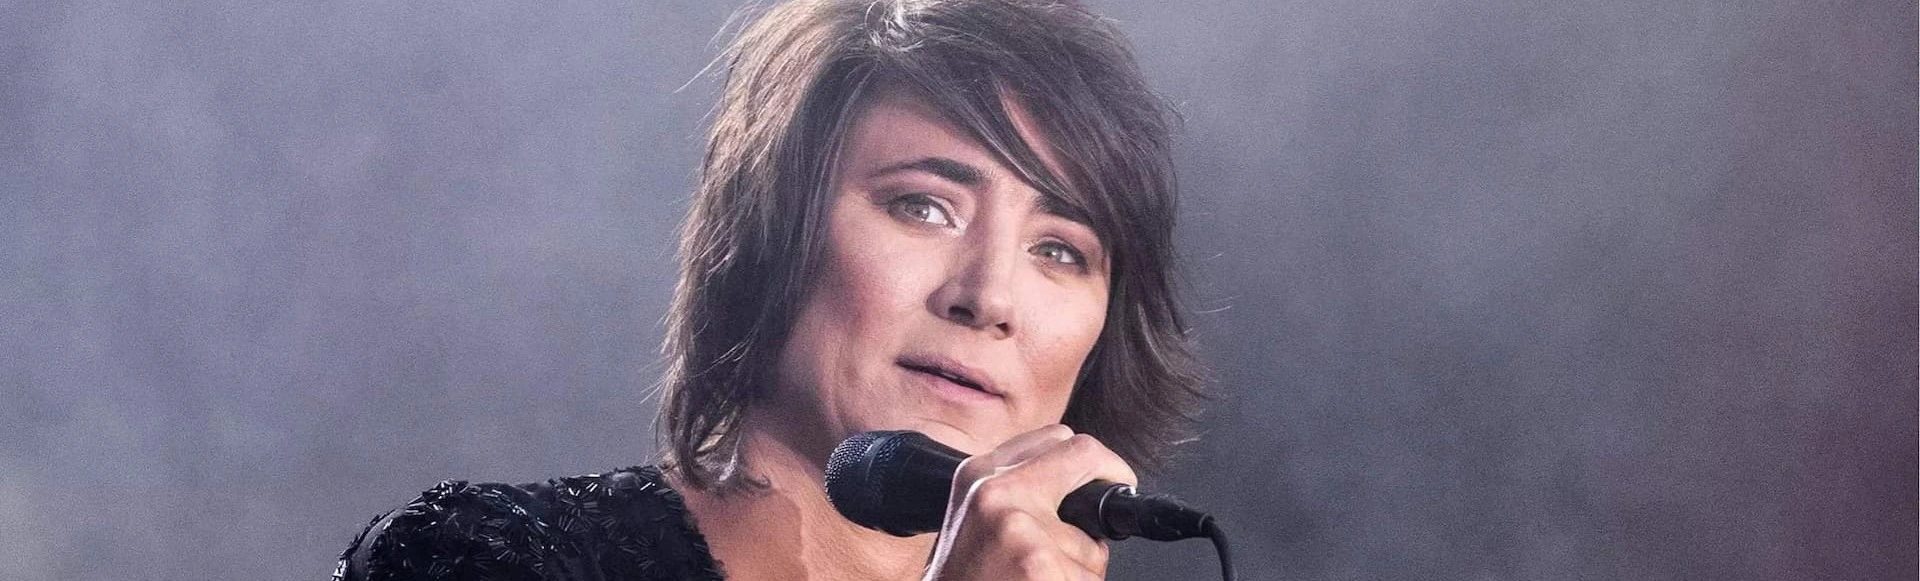 Zemfira will perform in Dubai on March 11